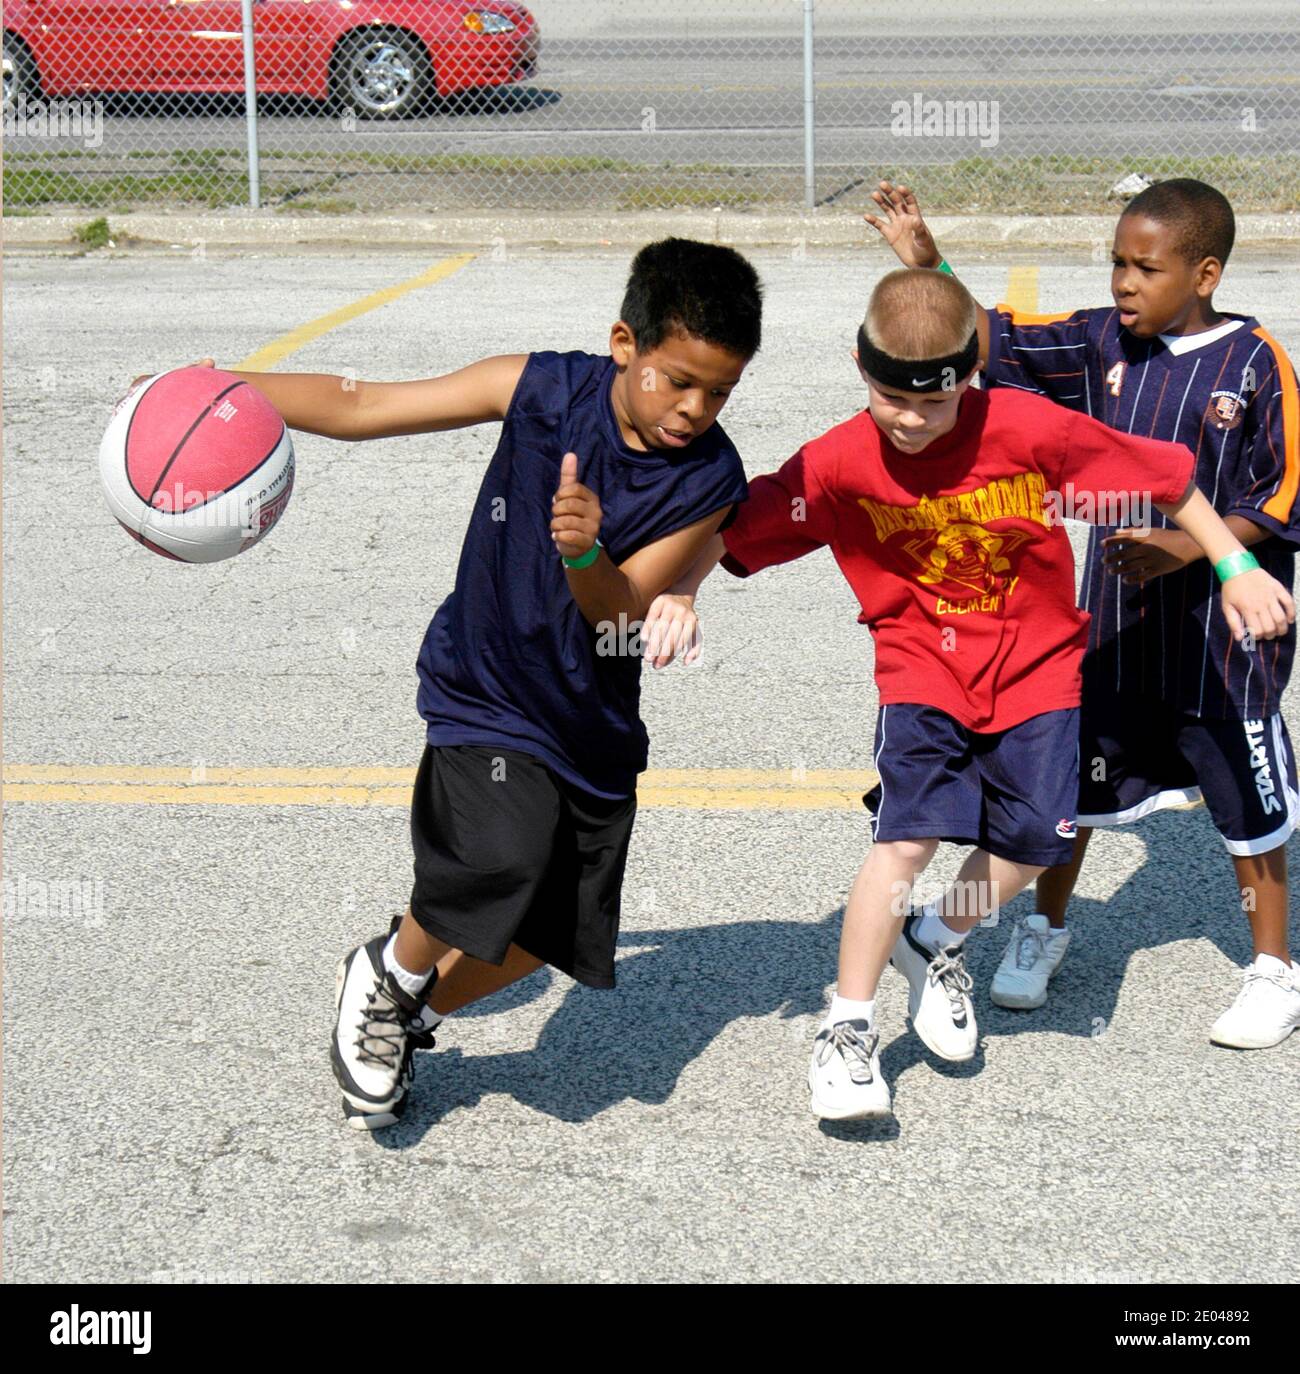 8 through 10 year old boys and girls play basketball outside in a city sponsored tournament Port Huron Michigan MI Stock Photo